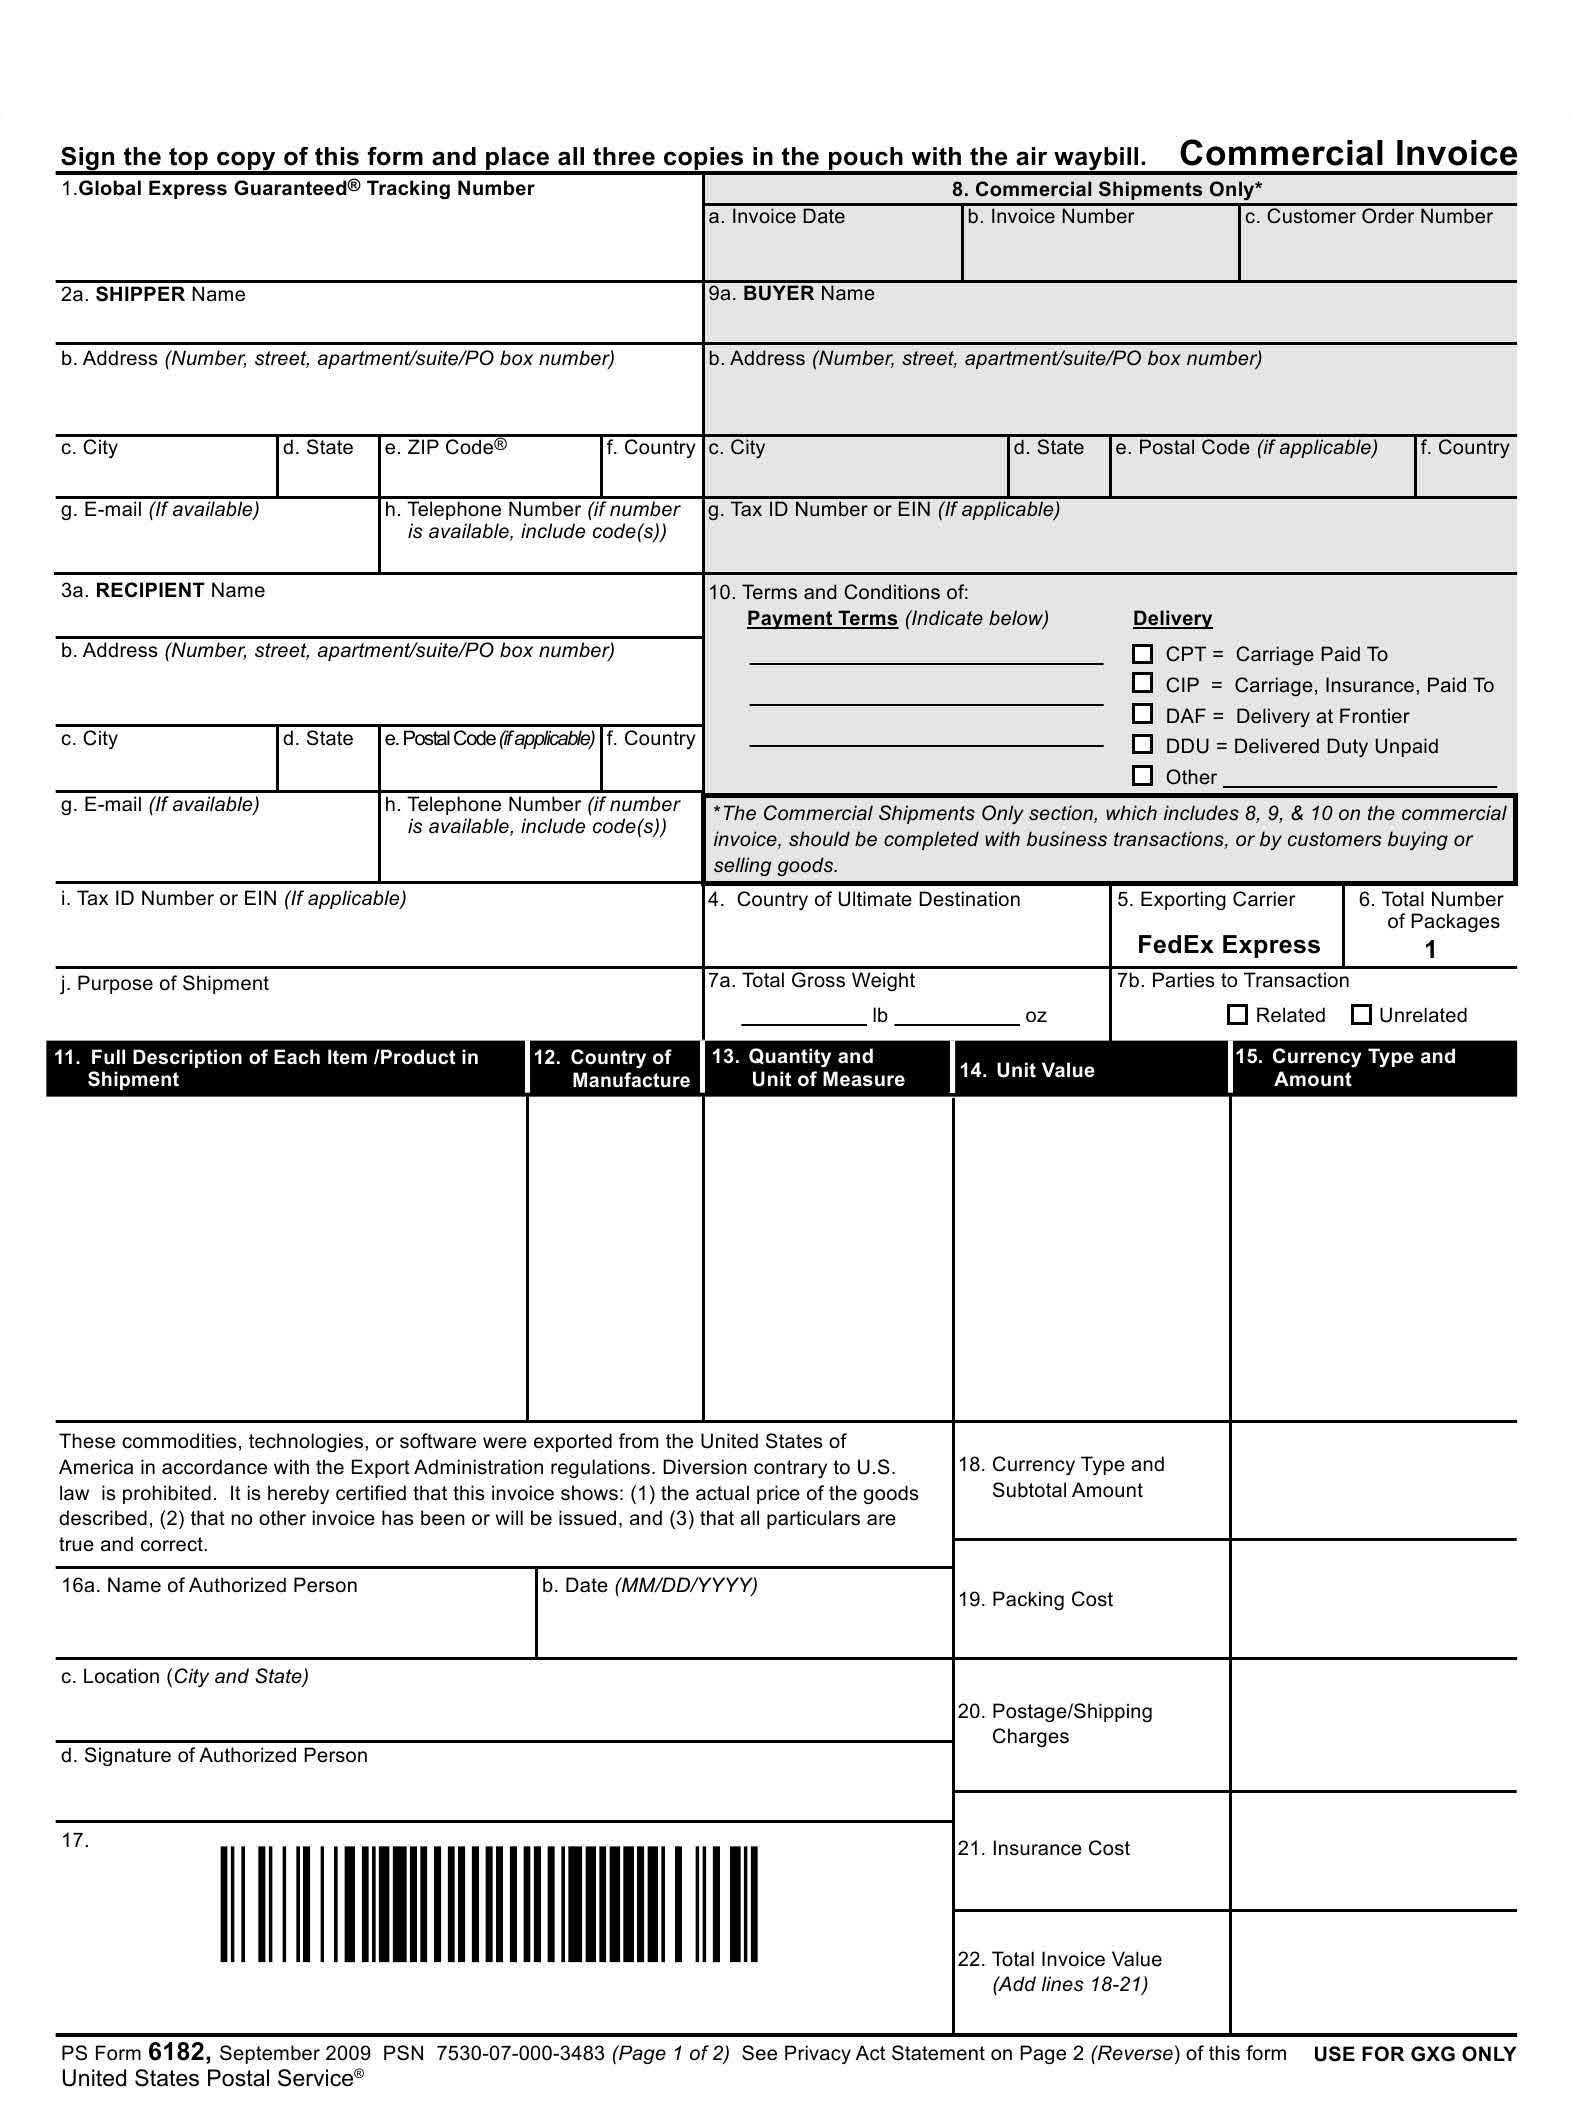 commercial invoice us customs commercial invoice